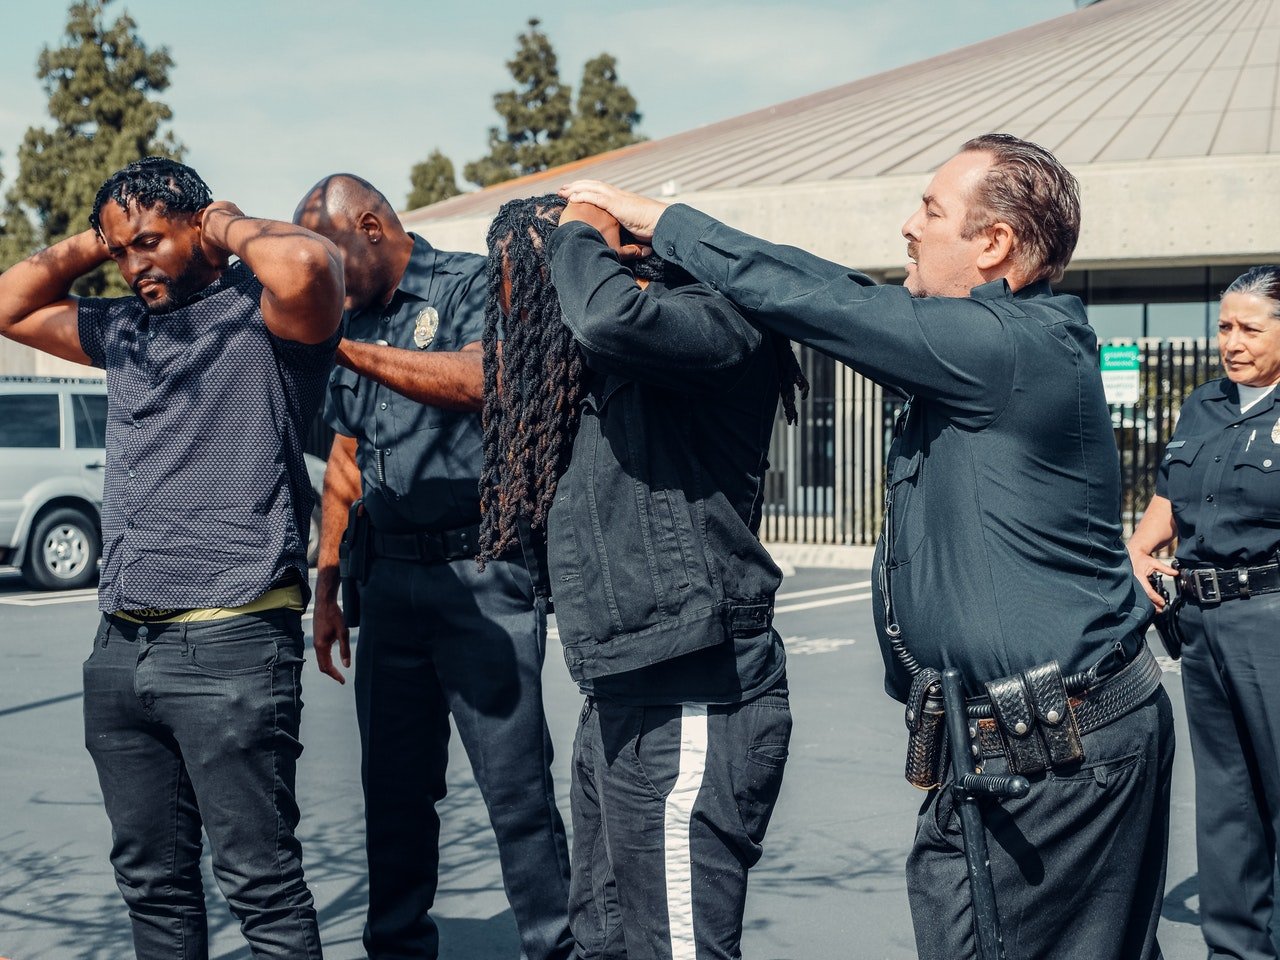 Police officers making an arrest | Photo: Pexels